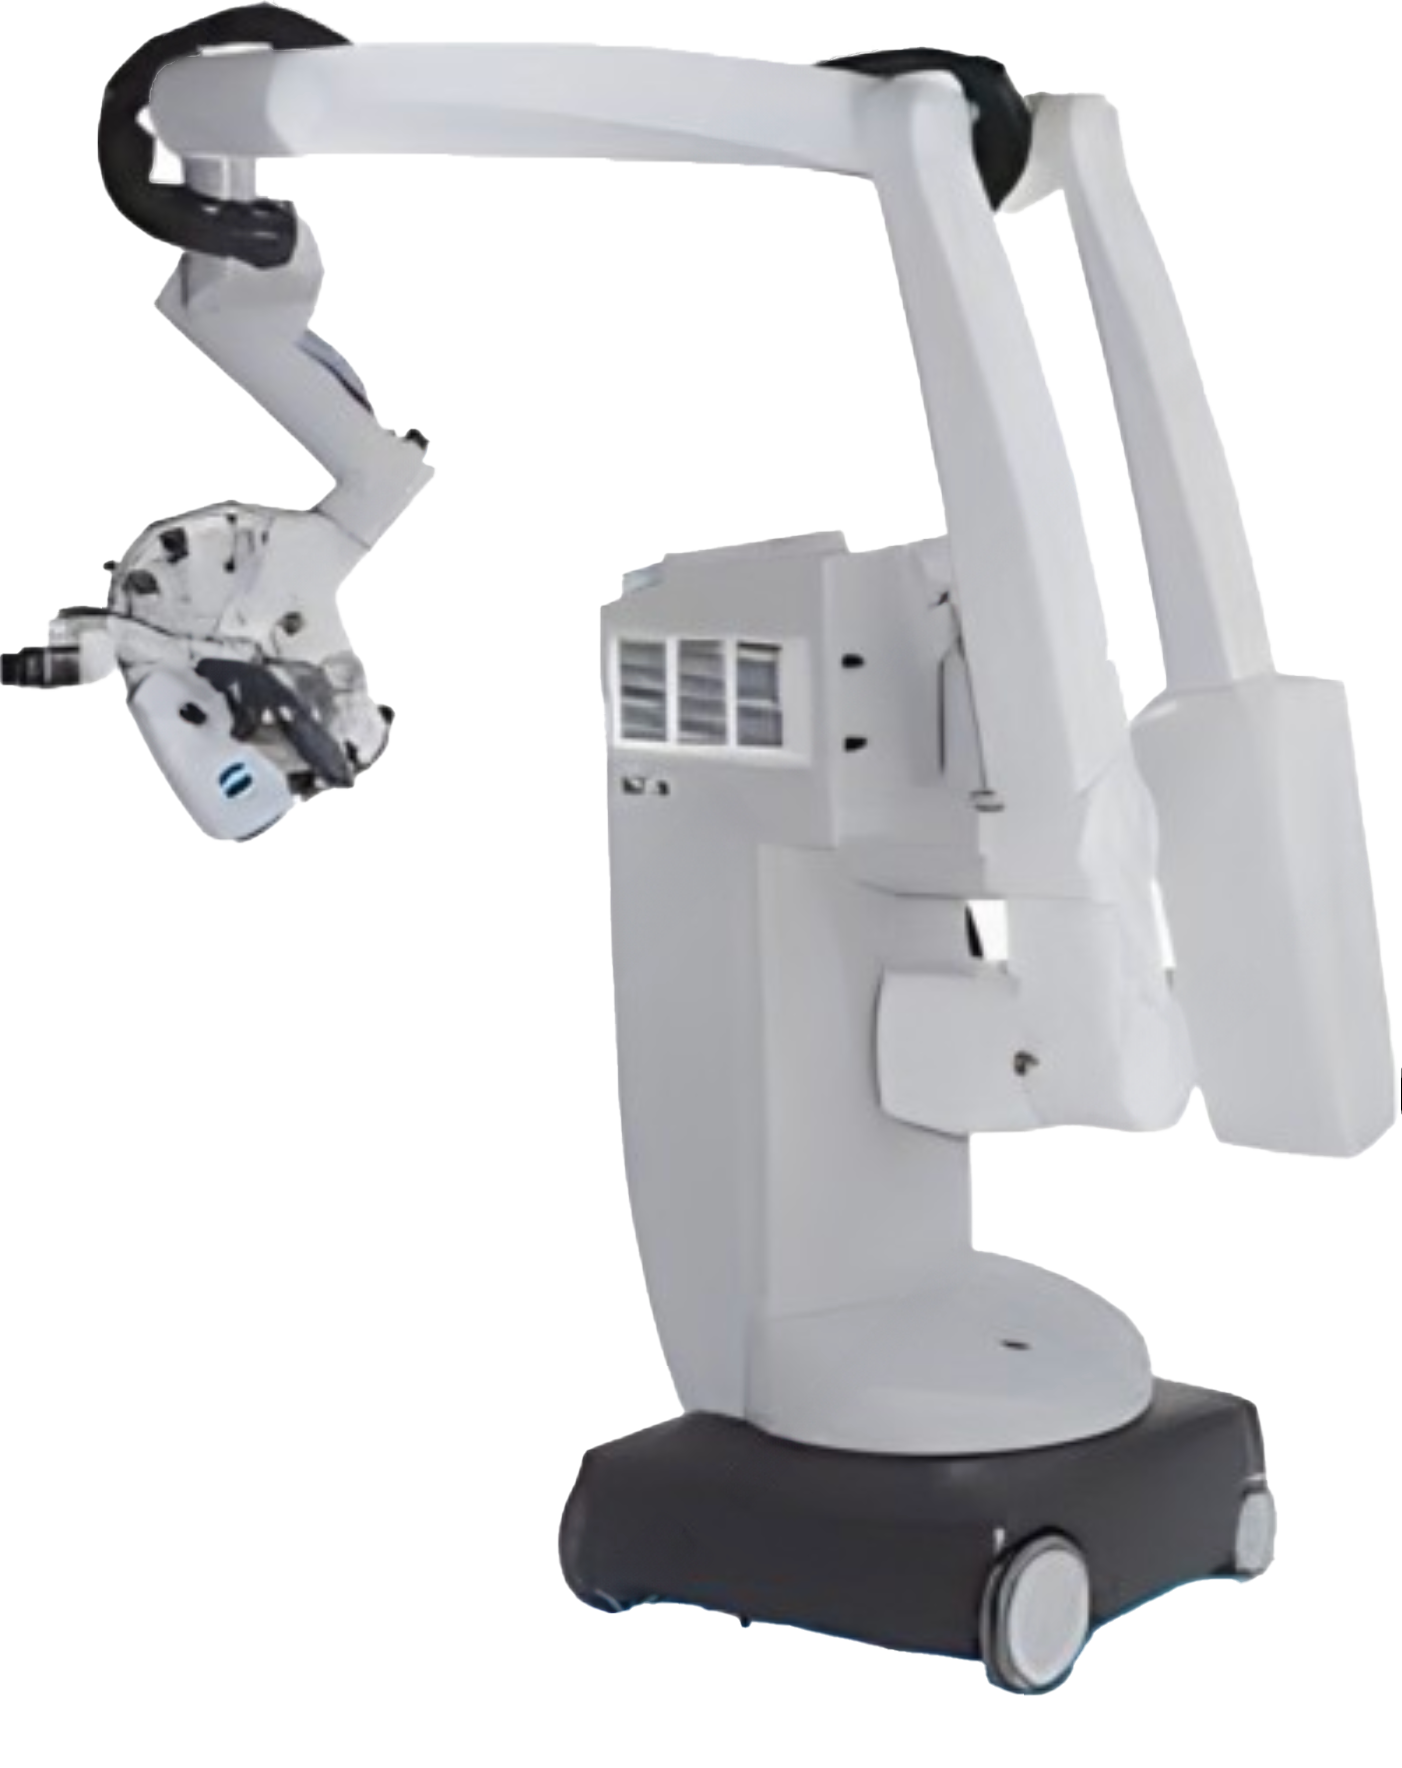 Zeiss OPMI Neuro NC4 Surgical Microscope